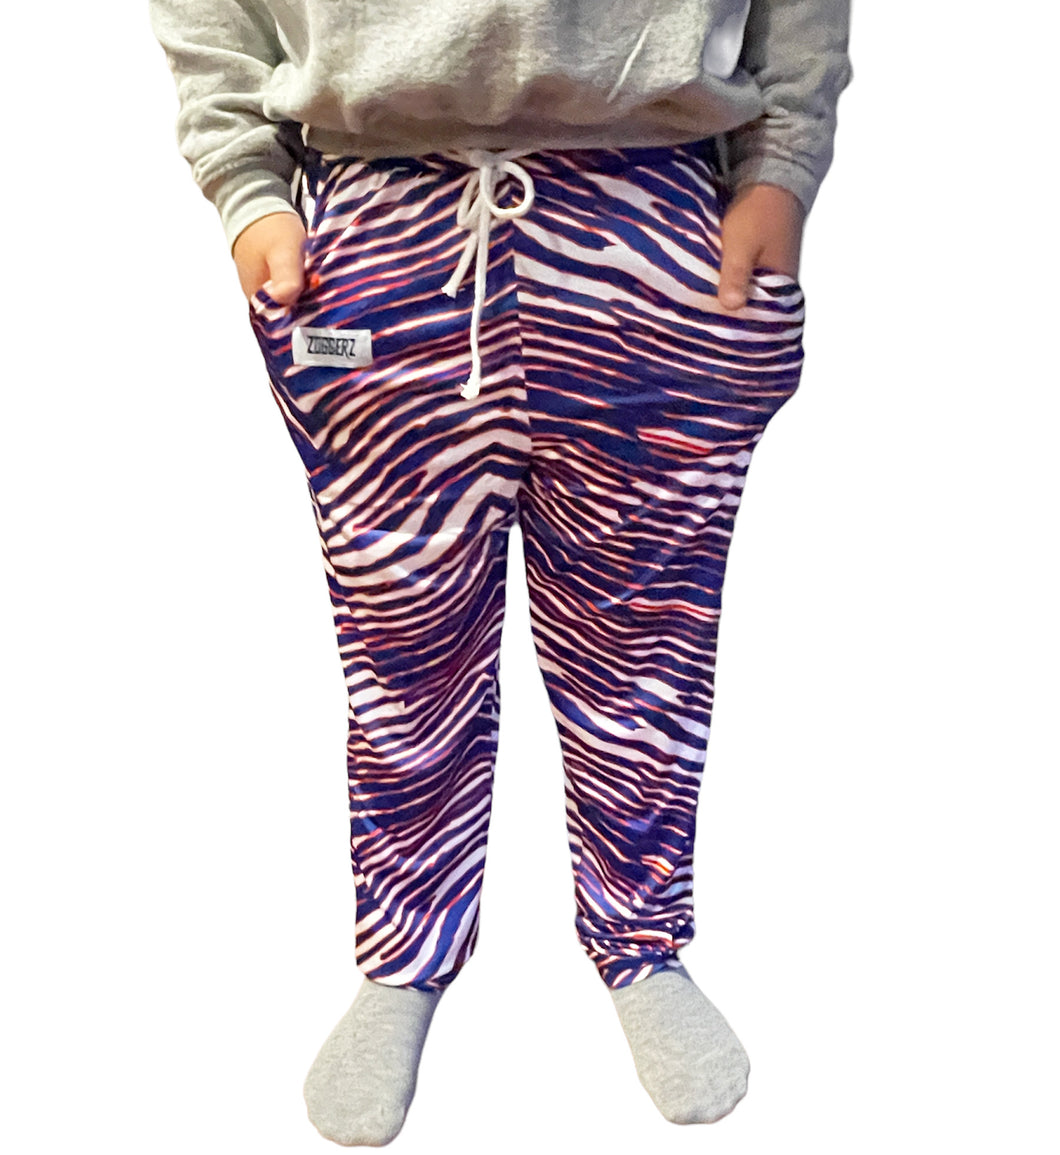 Youth Zogger Pants - daxl Boutique